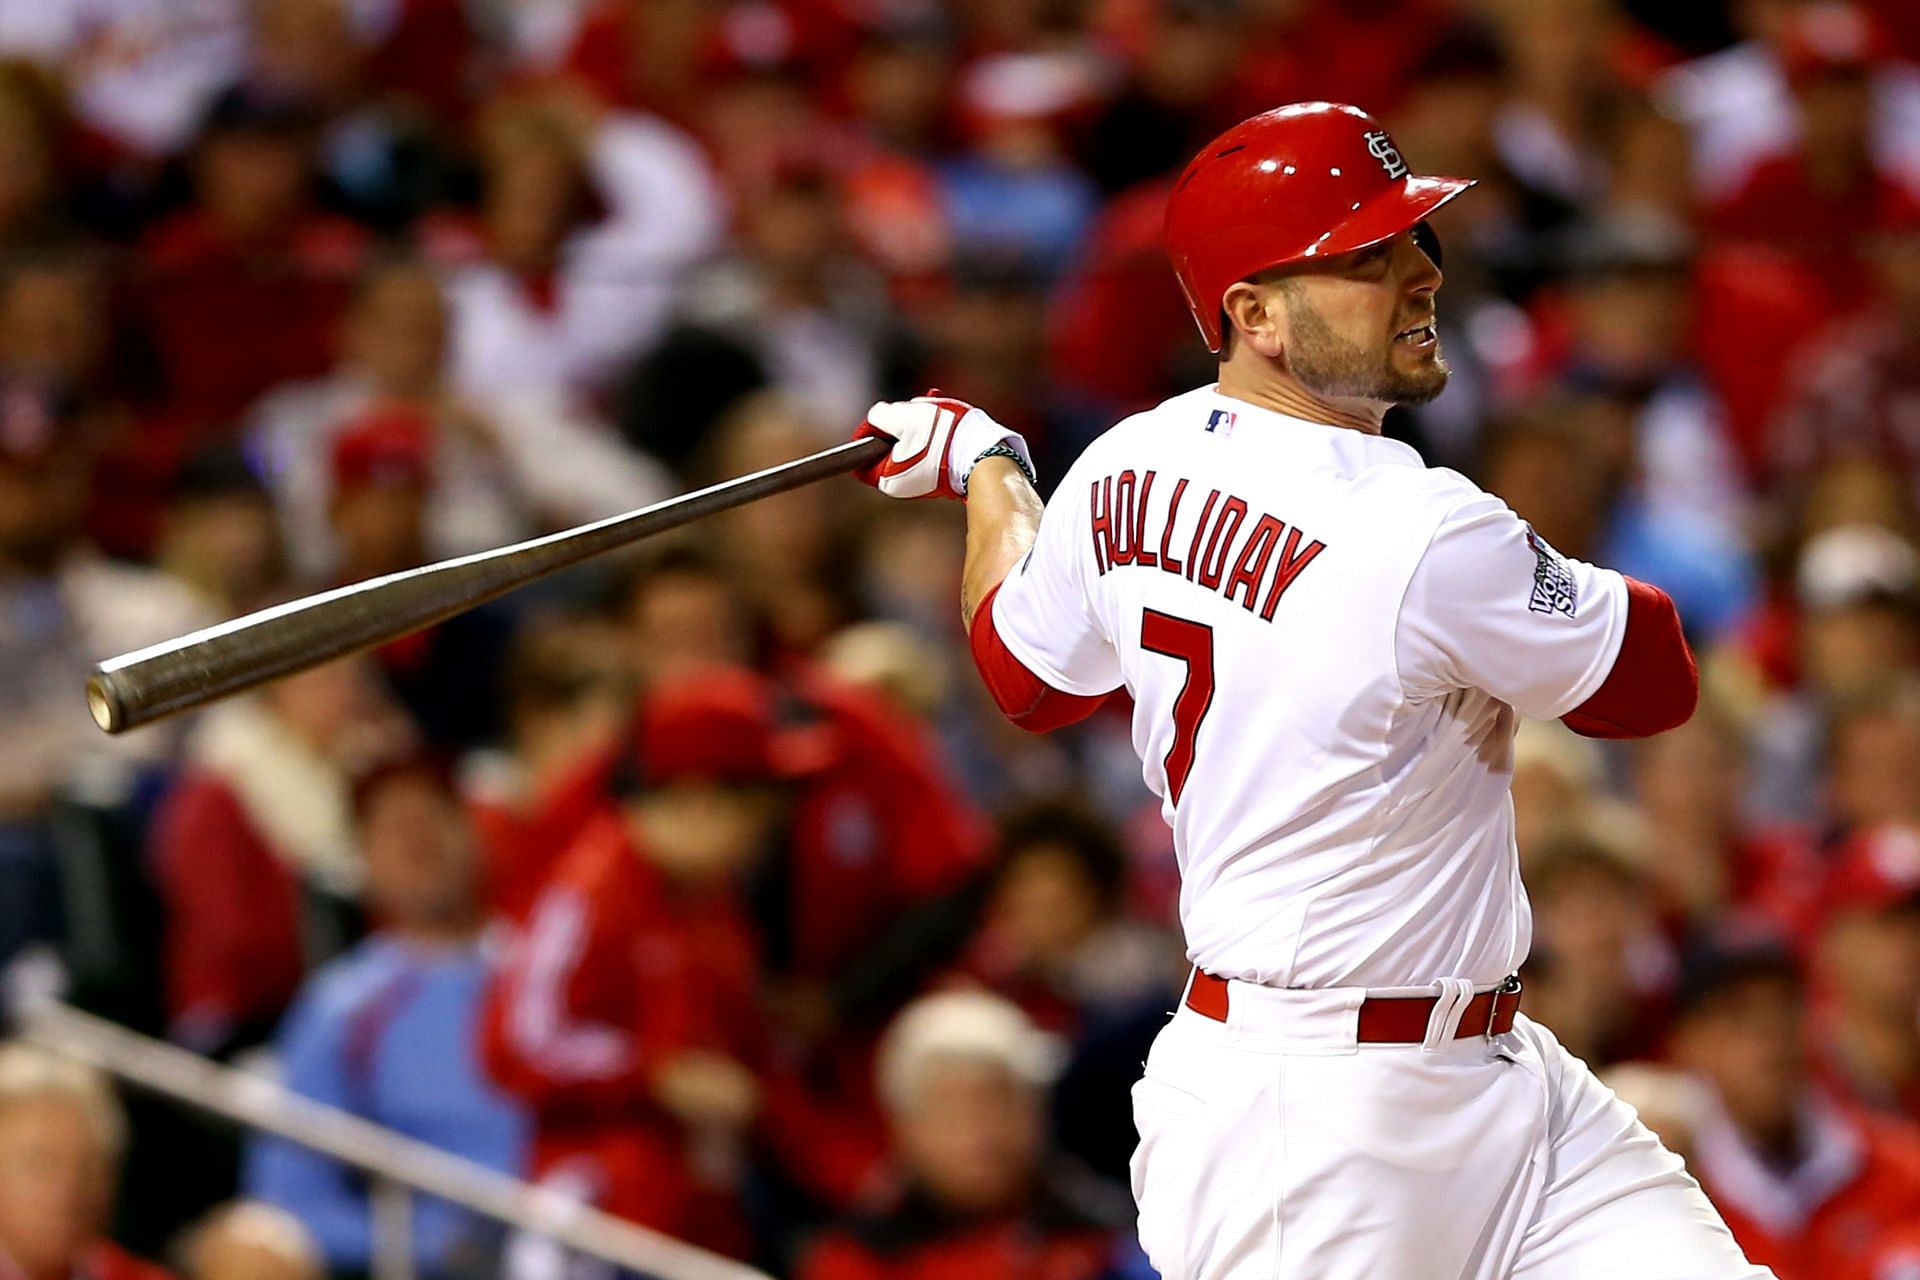 ST LOUIS, MO - OCTOBER 28: Matt Holliday #7 of the St. Louis Cardinals hits a solo home run in the fourth inning against the Boston Red Sox during Game Five of the 2013 World Series at Busch Stadium on October 28, 2013 in St Louis, Missouri. (Photo by Elsa/Getty Images)